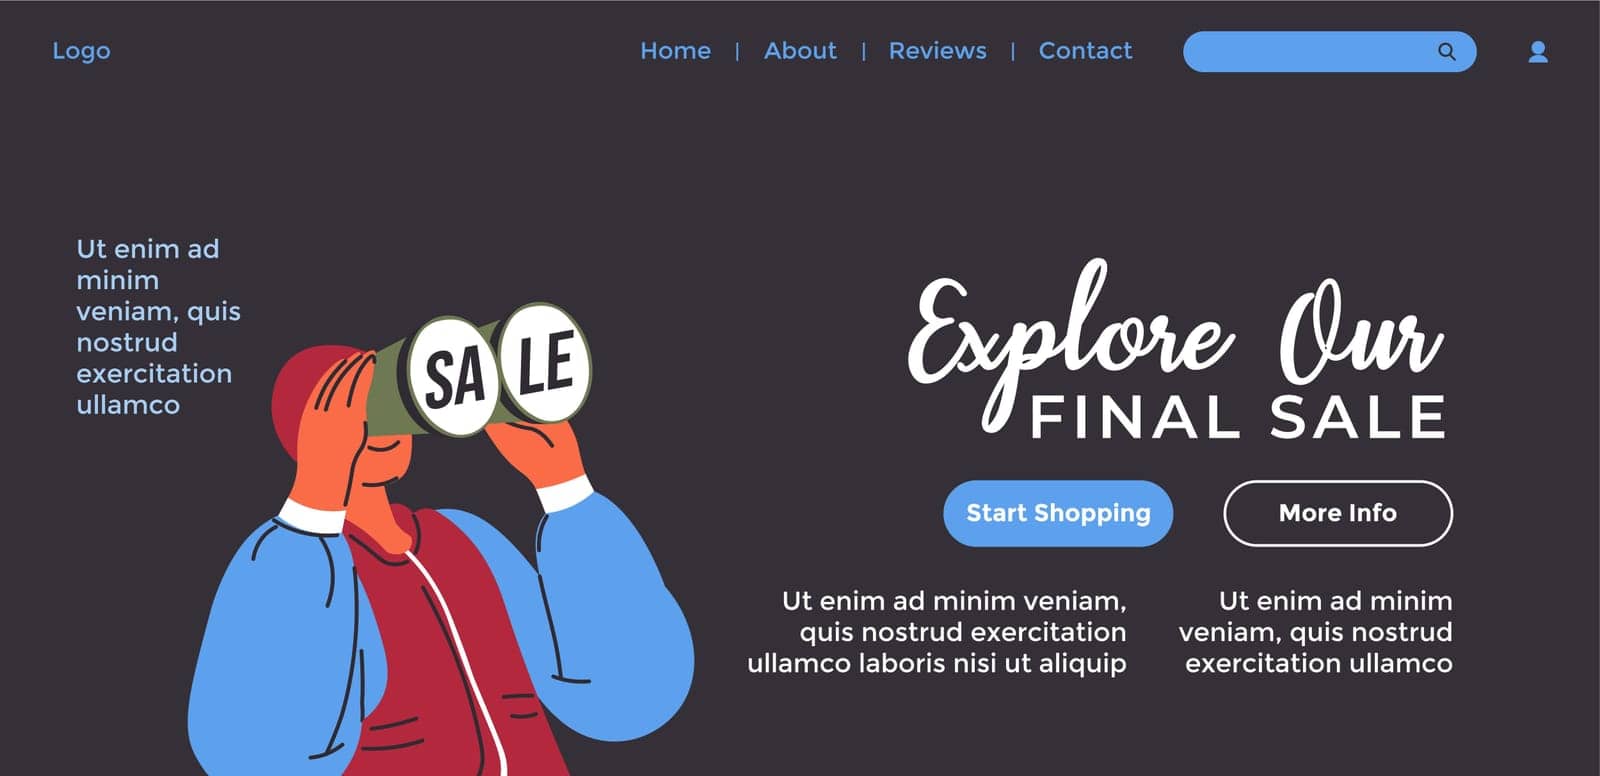 Explore our final sale, start shopping, website by Sonulkaster